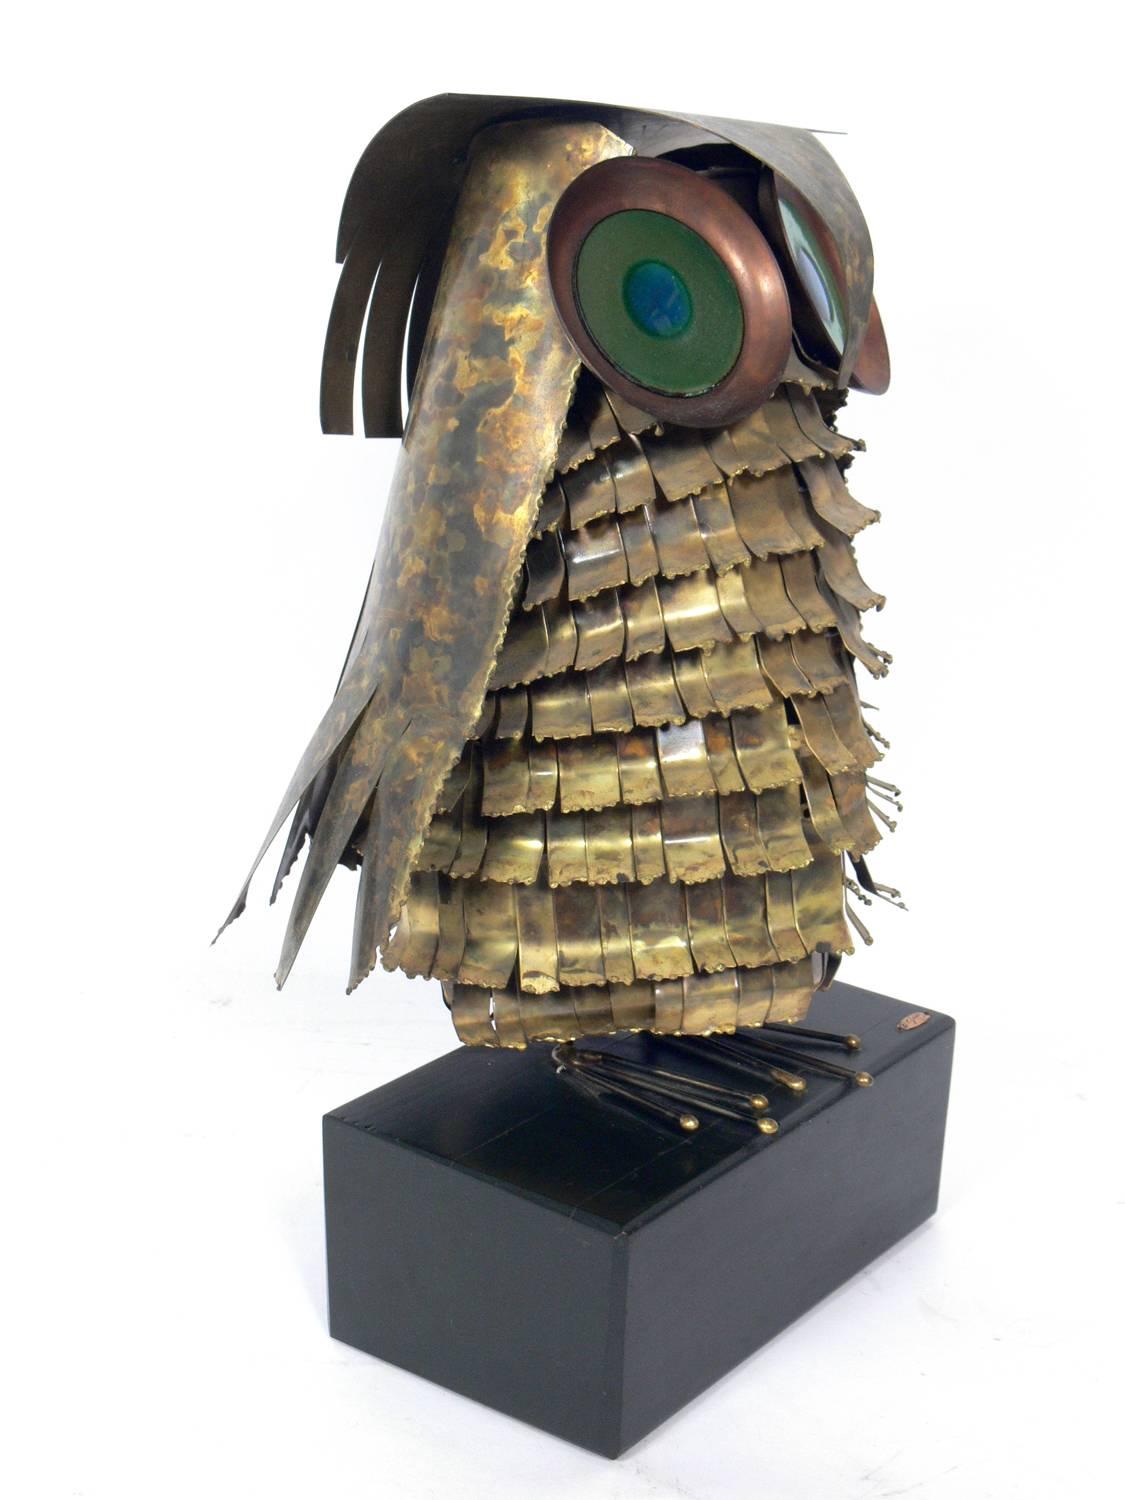 Whimsical Owl Sculpture by Curtis Jere, American, circa 1969. Signed and dated on plaque on the base. This is the best example we have owned of Jere's owls. It is the larger size and the enamel eyes are still vibrant and colorful.